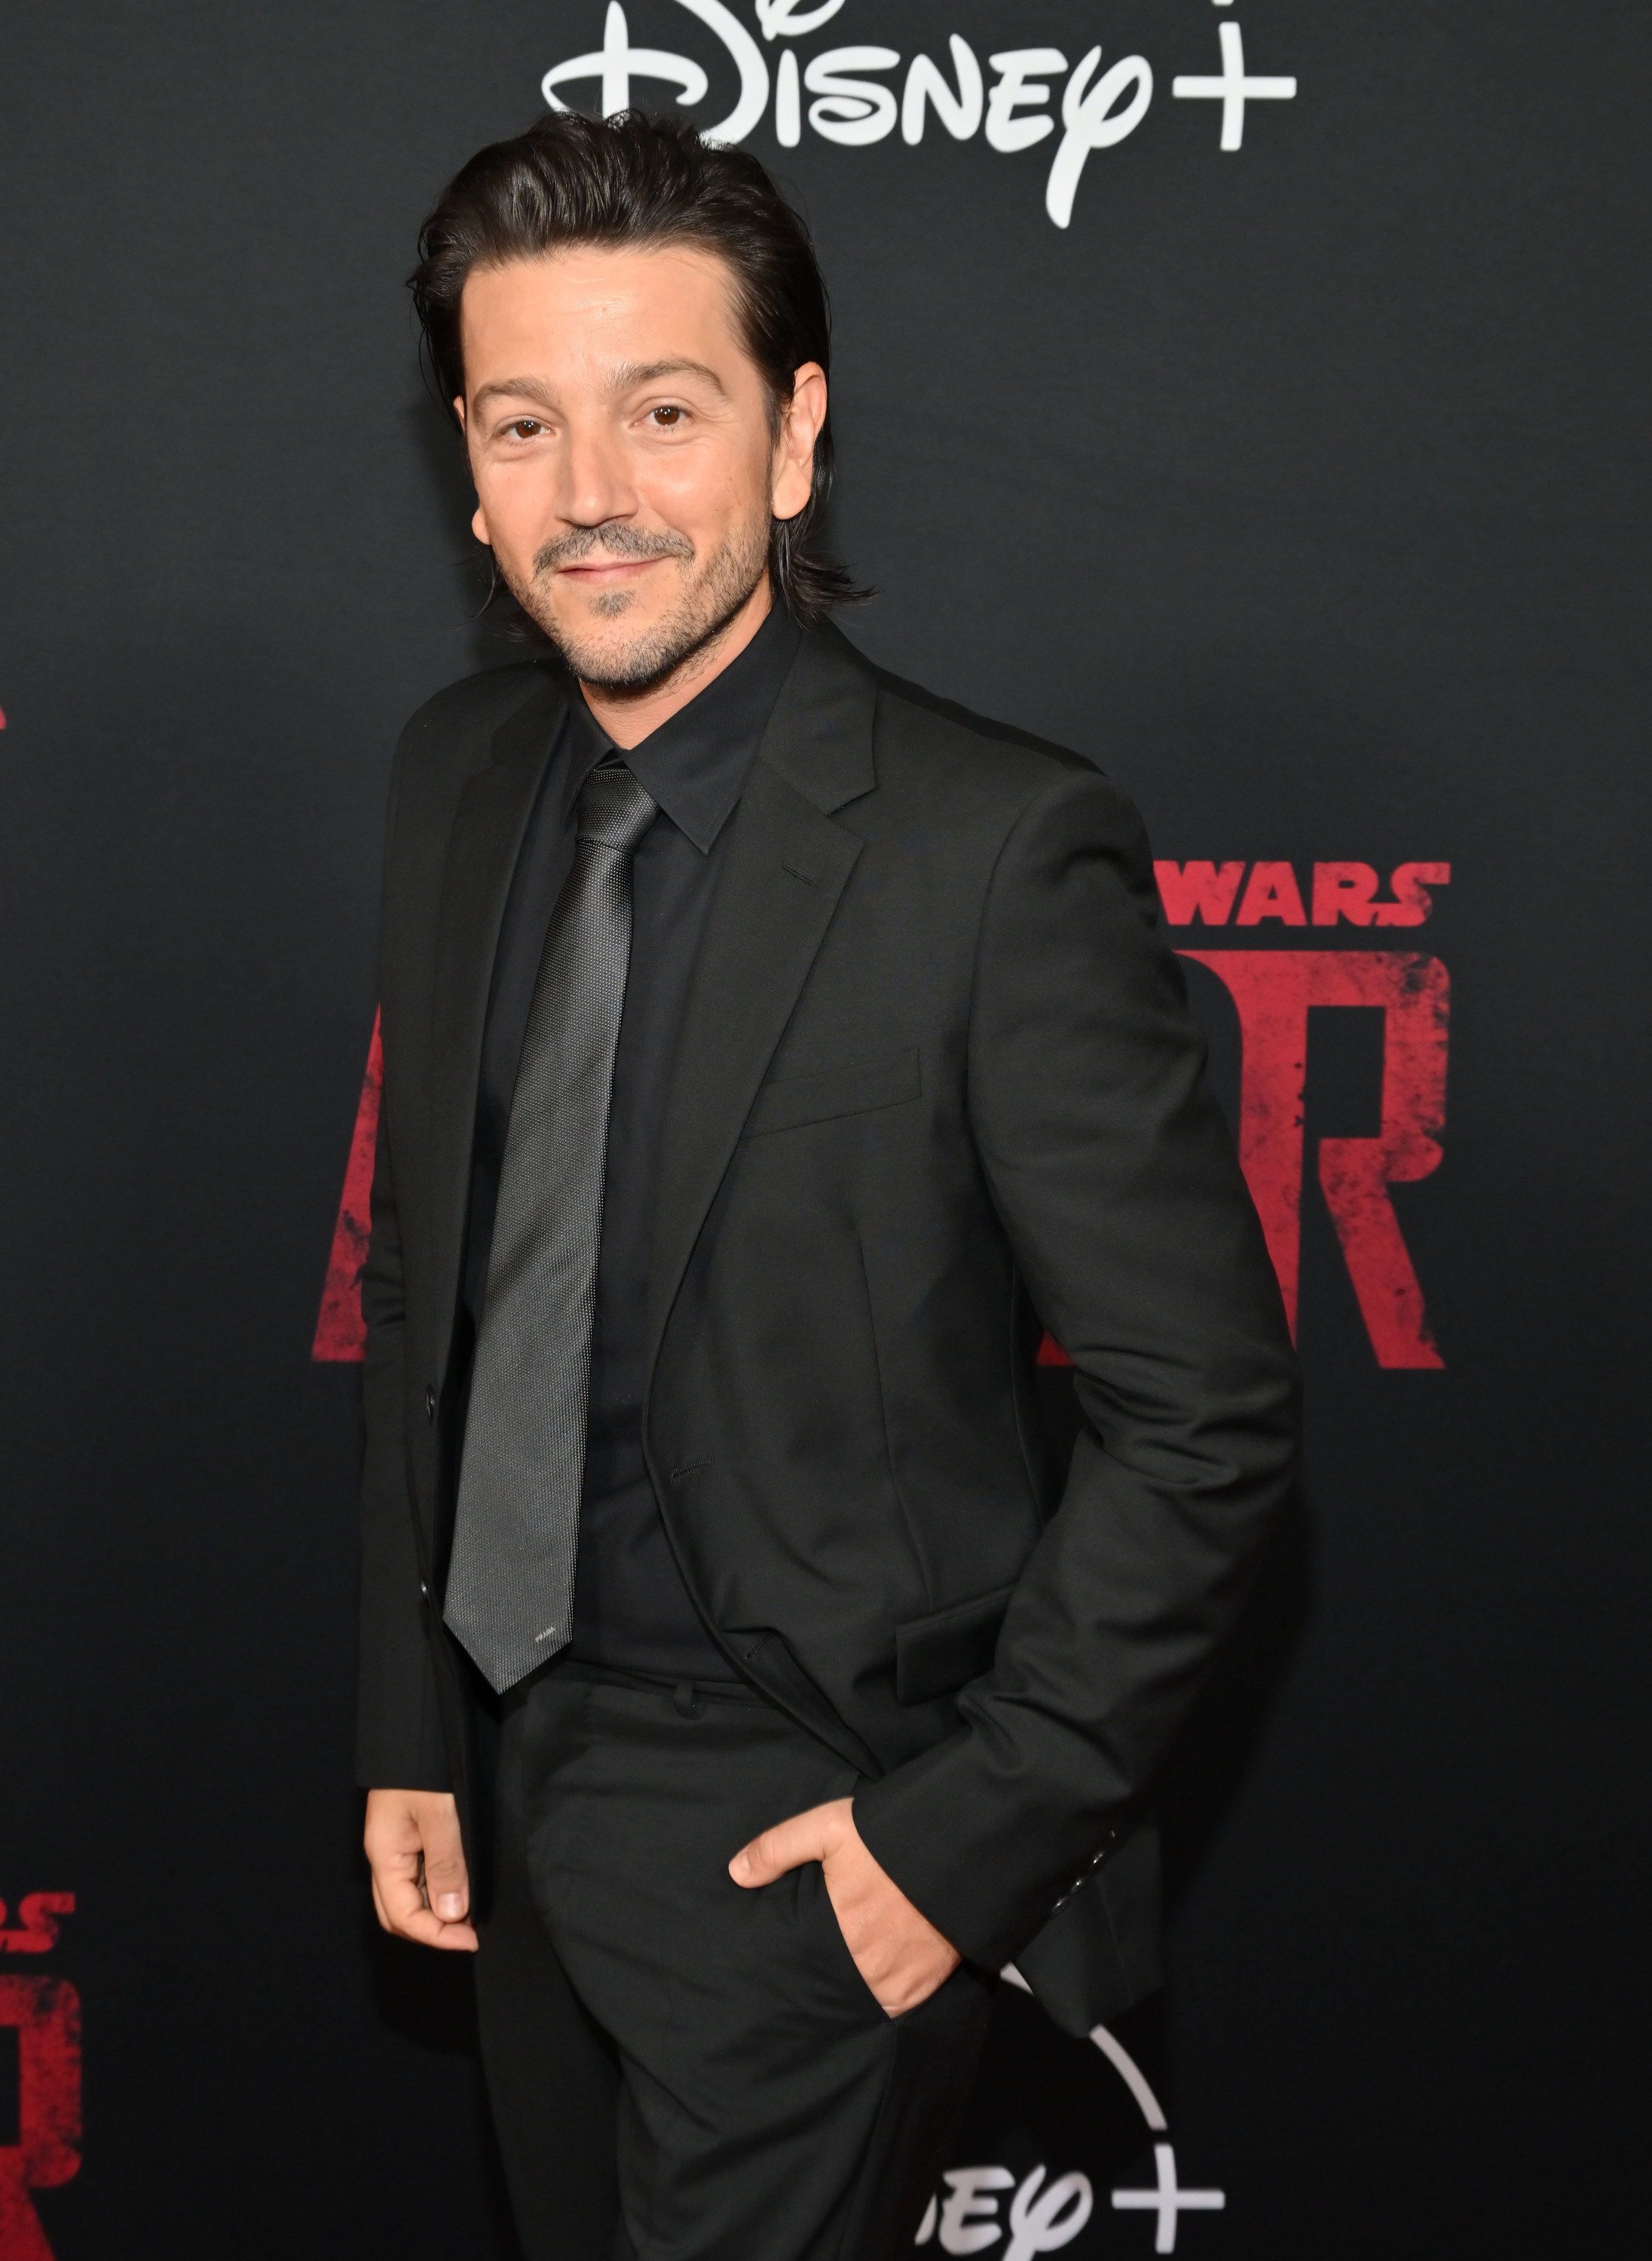 Diego Luna on the red carpet